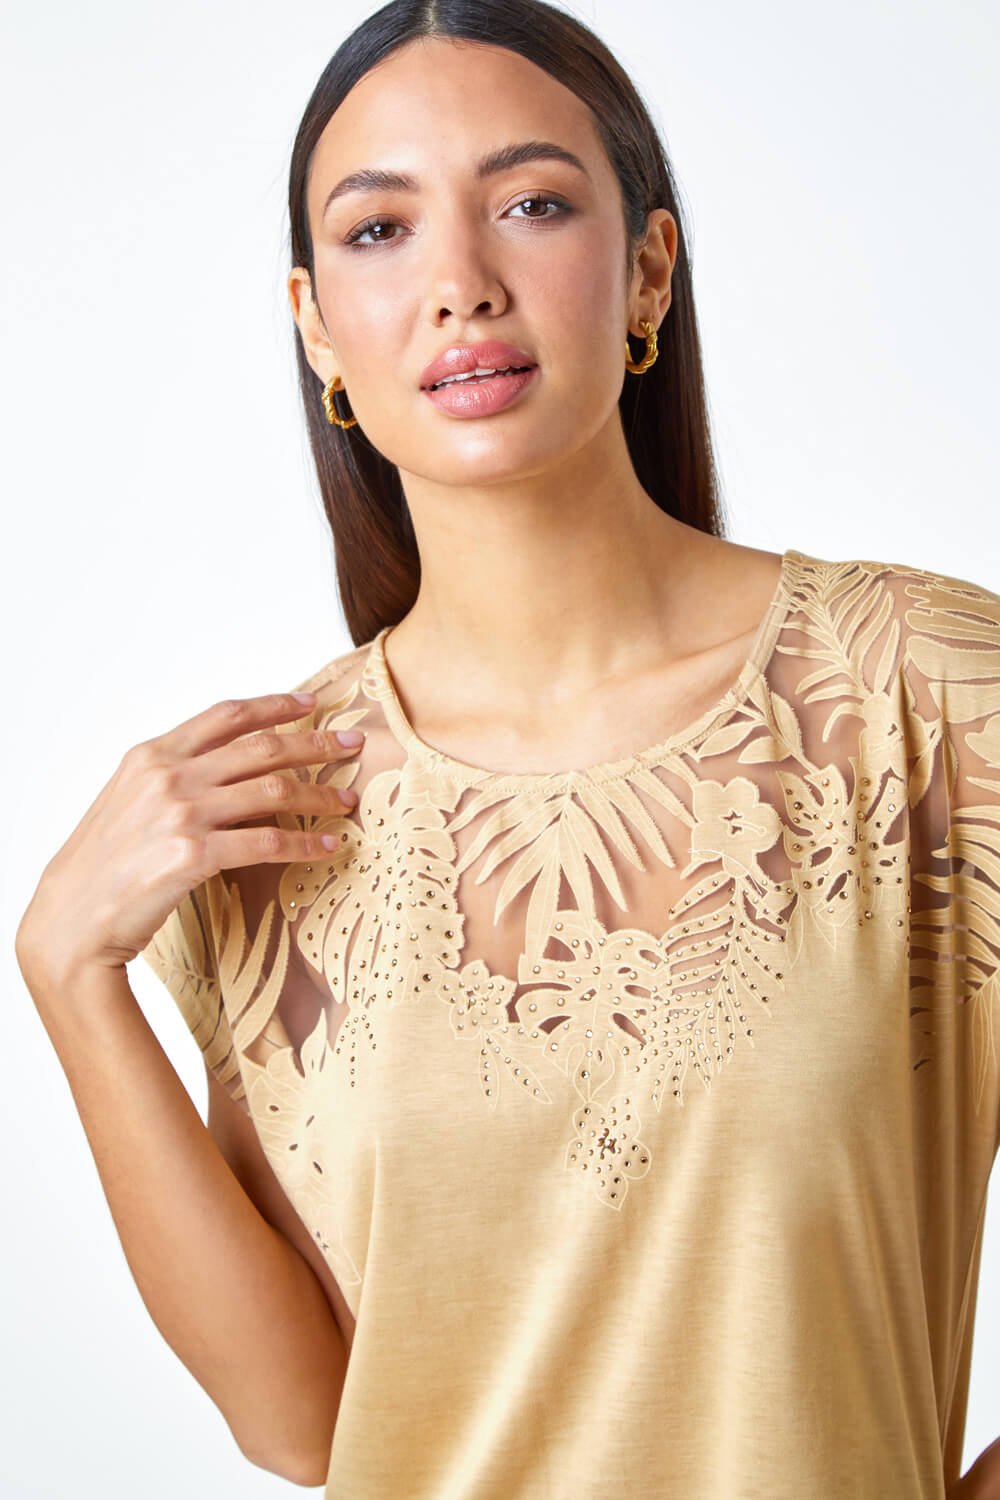 Gold Embellished Palm Print Cut Out T-Shirt, Image 5 of 5